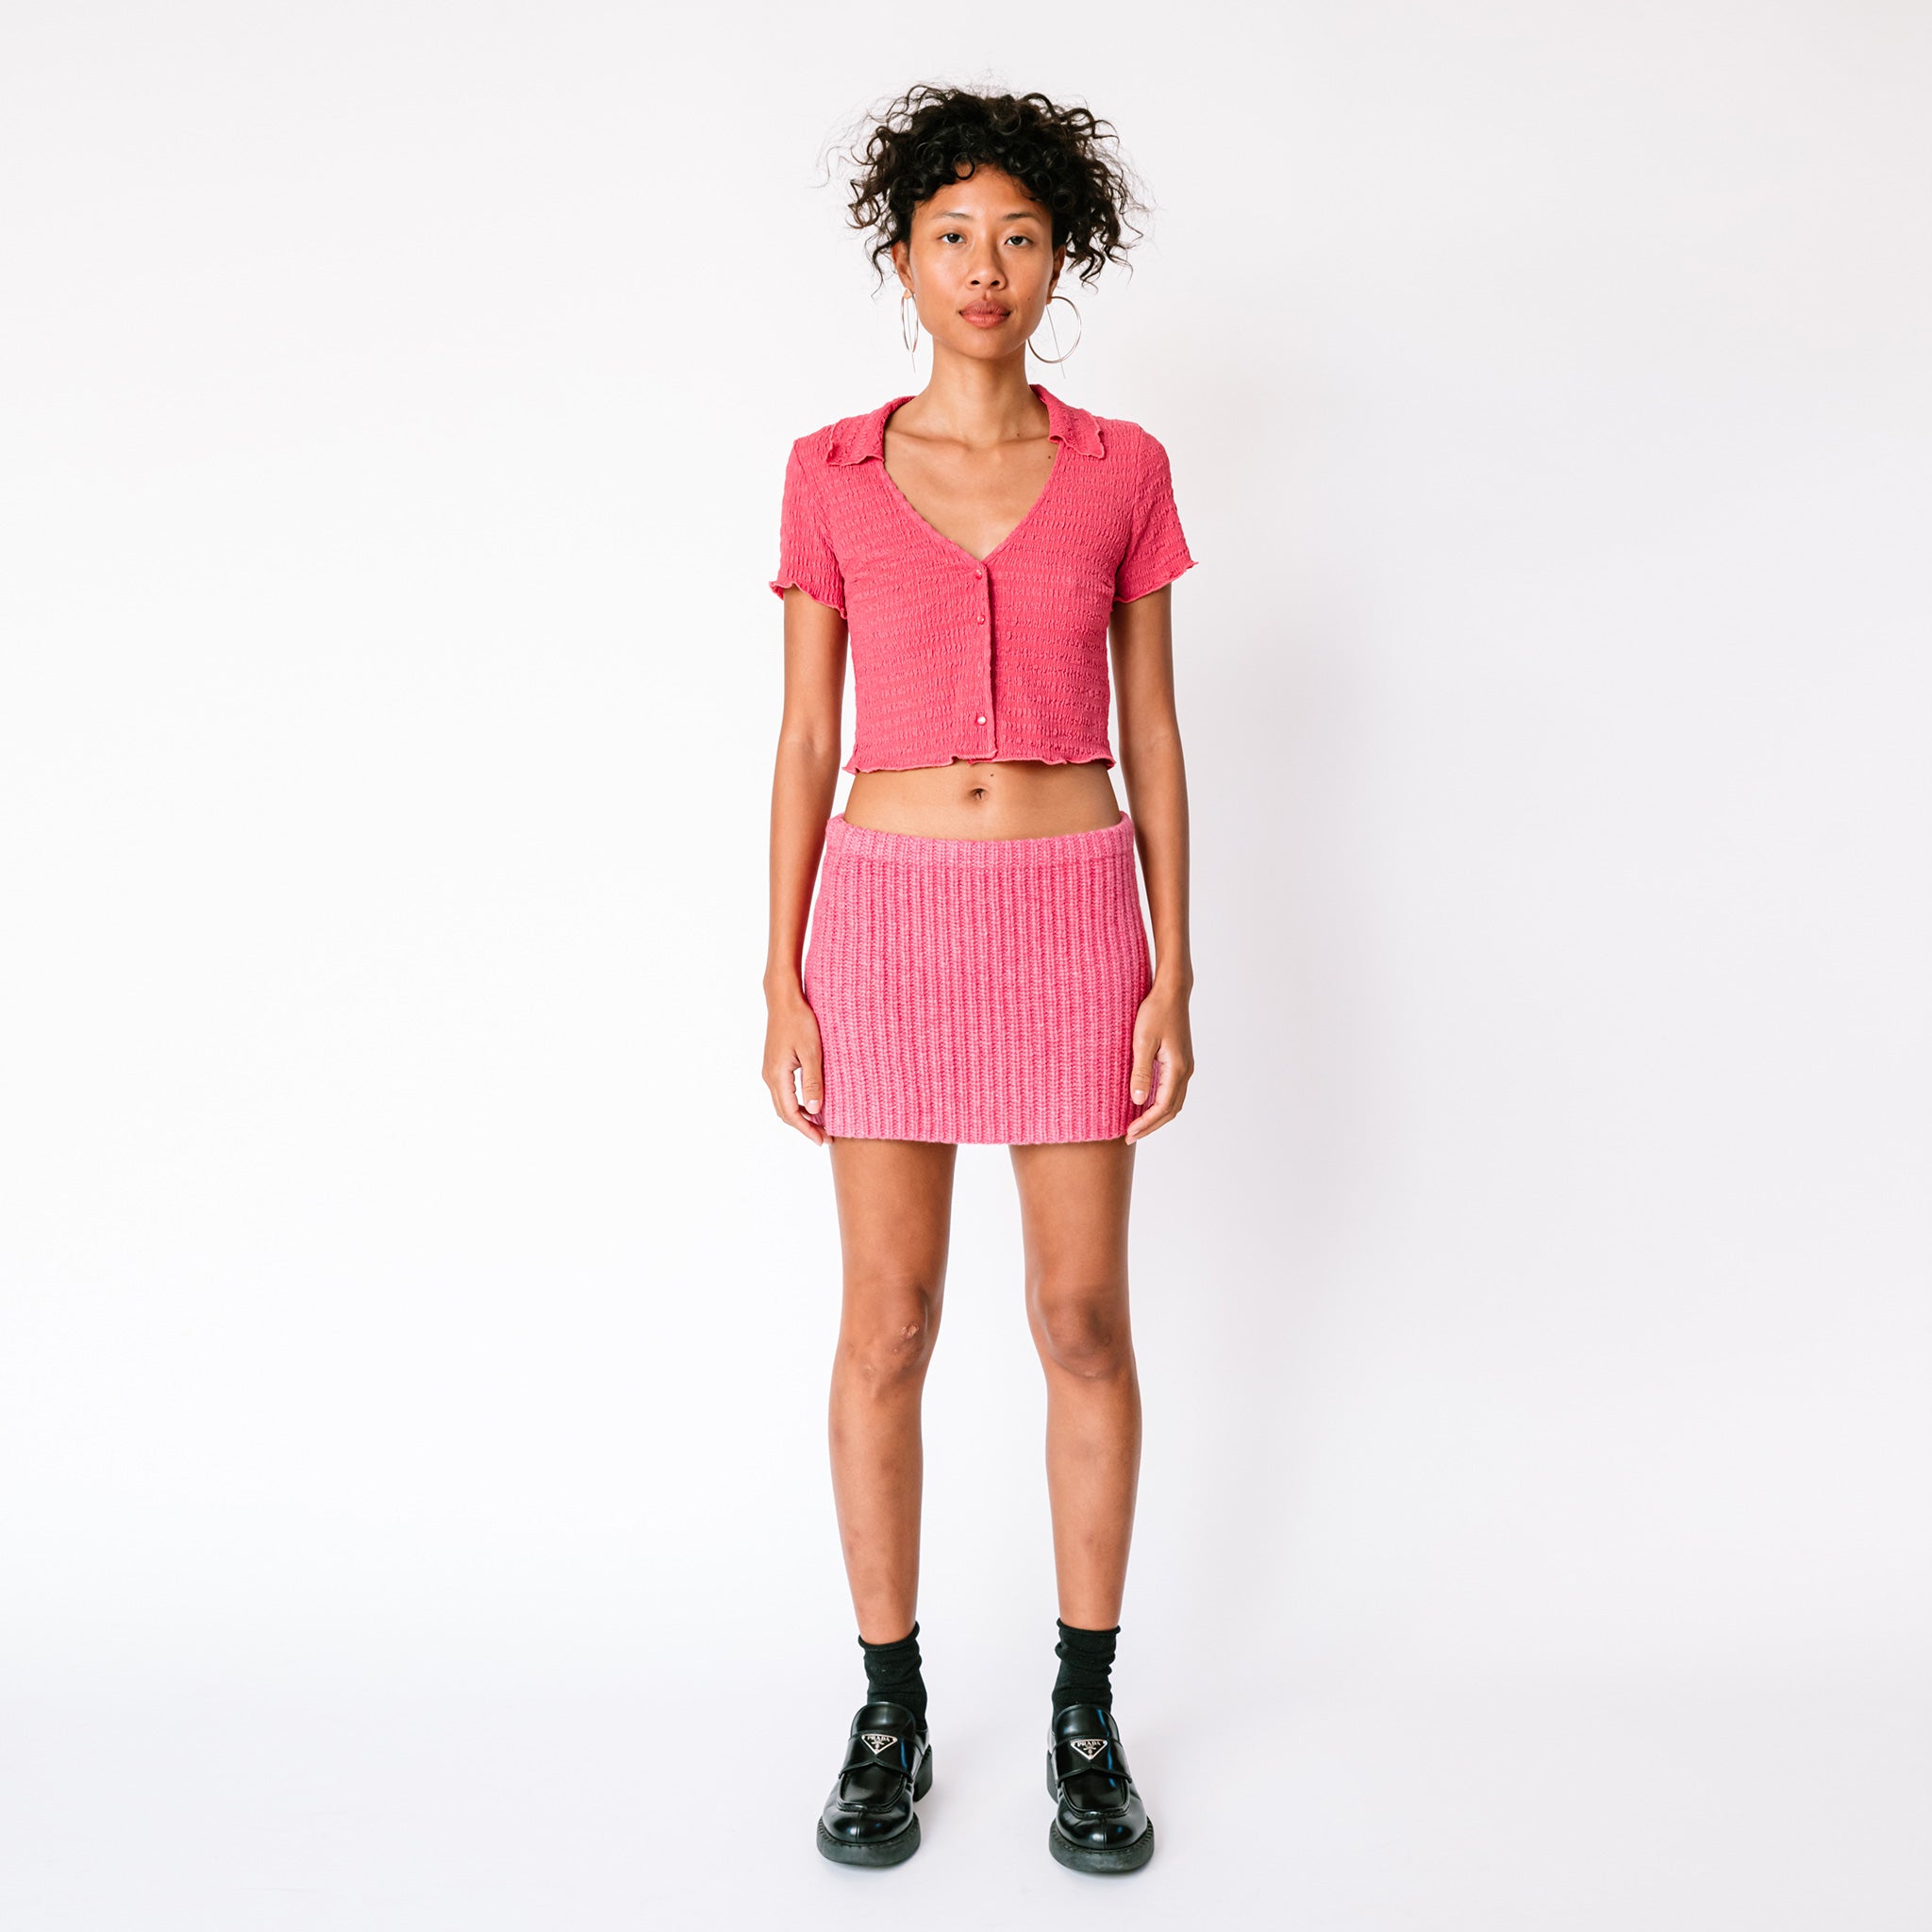 A model wears Misc Etc's pink ruched polo top in dark rose, paired with a matching pink mini skirt and black loafers, full outfit view.